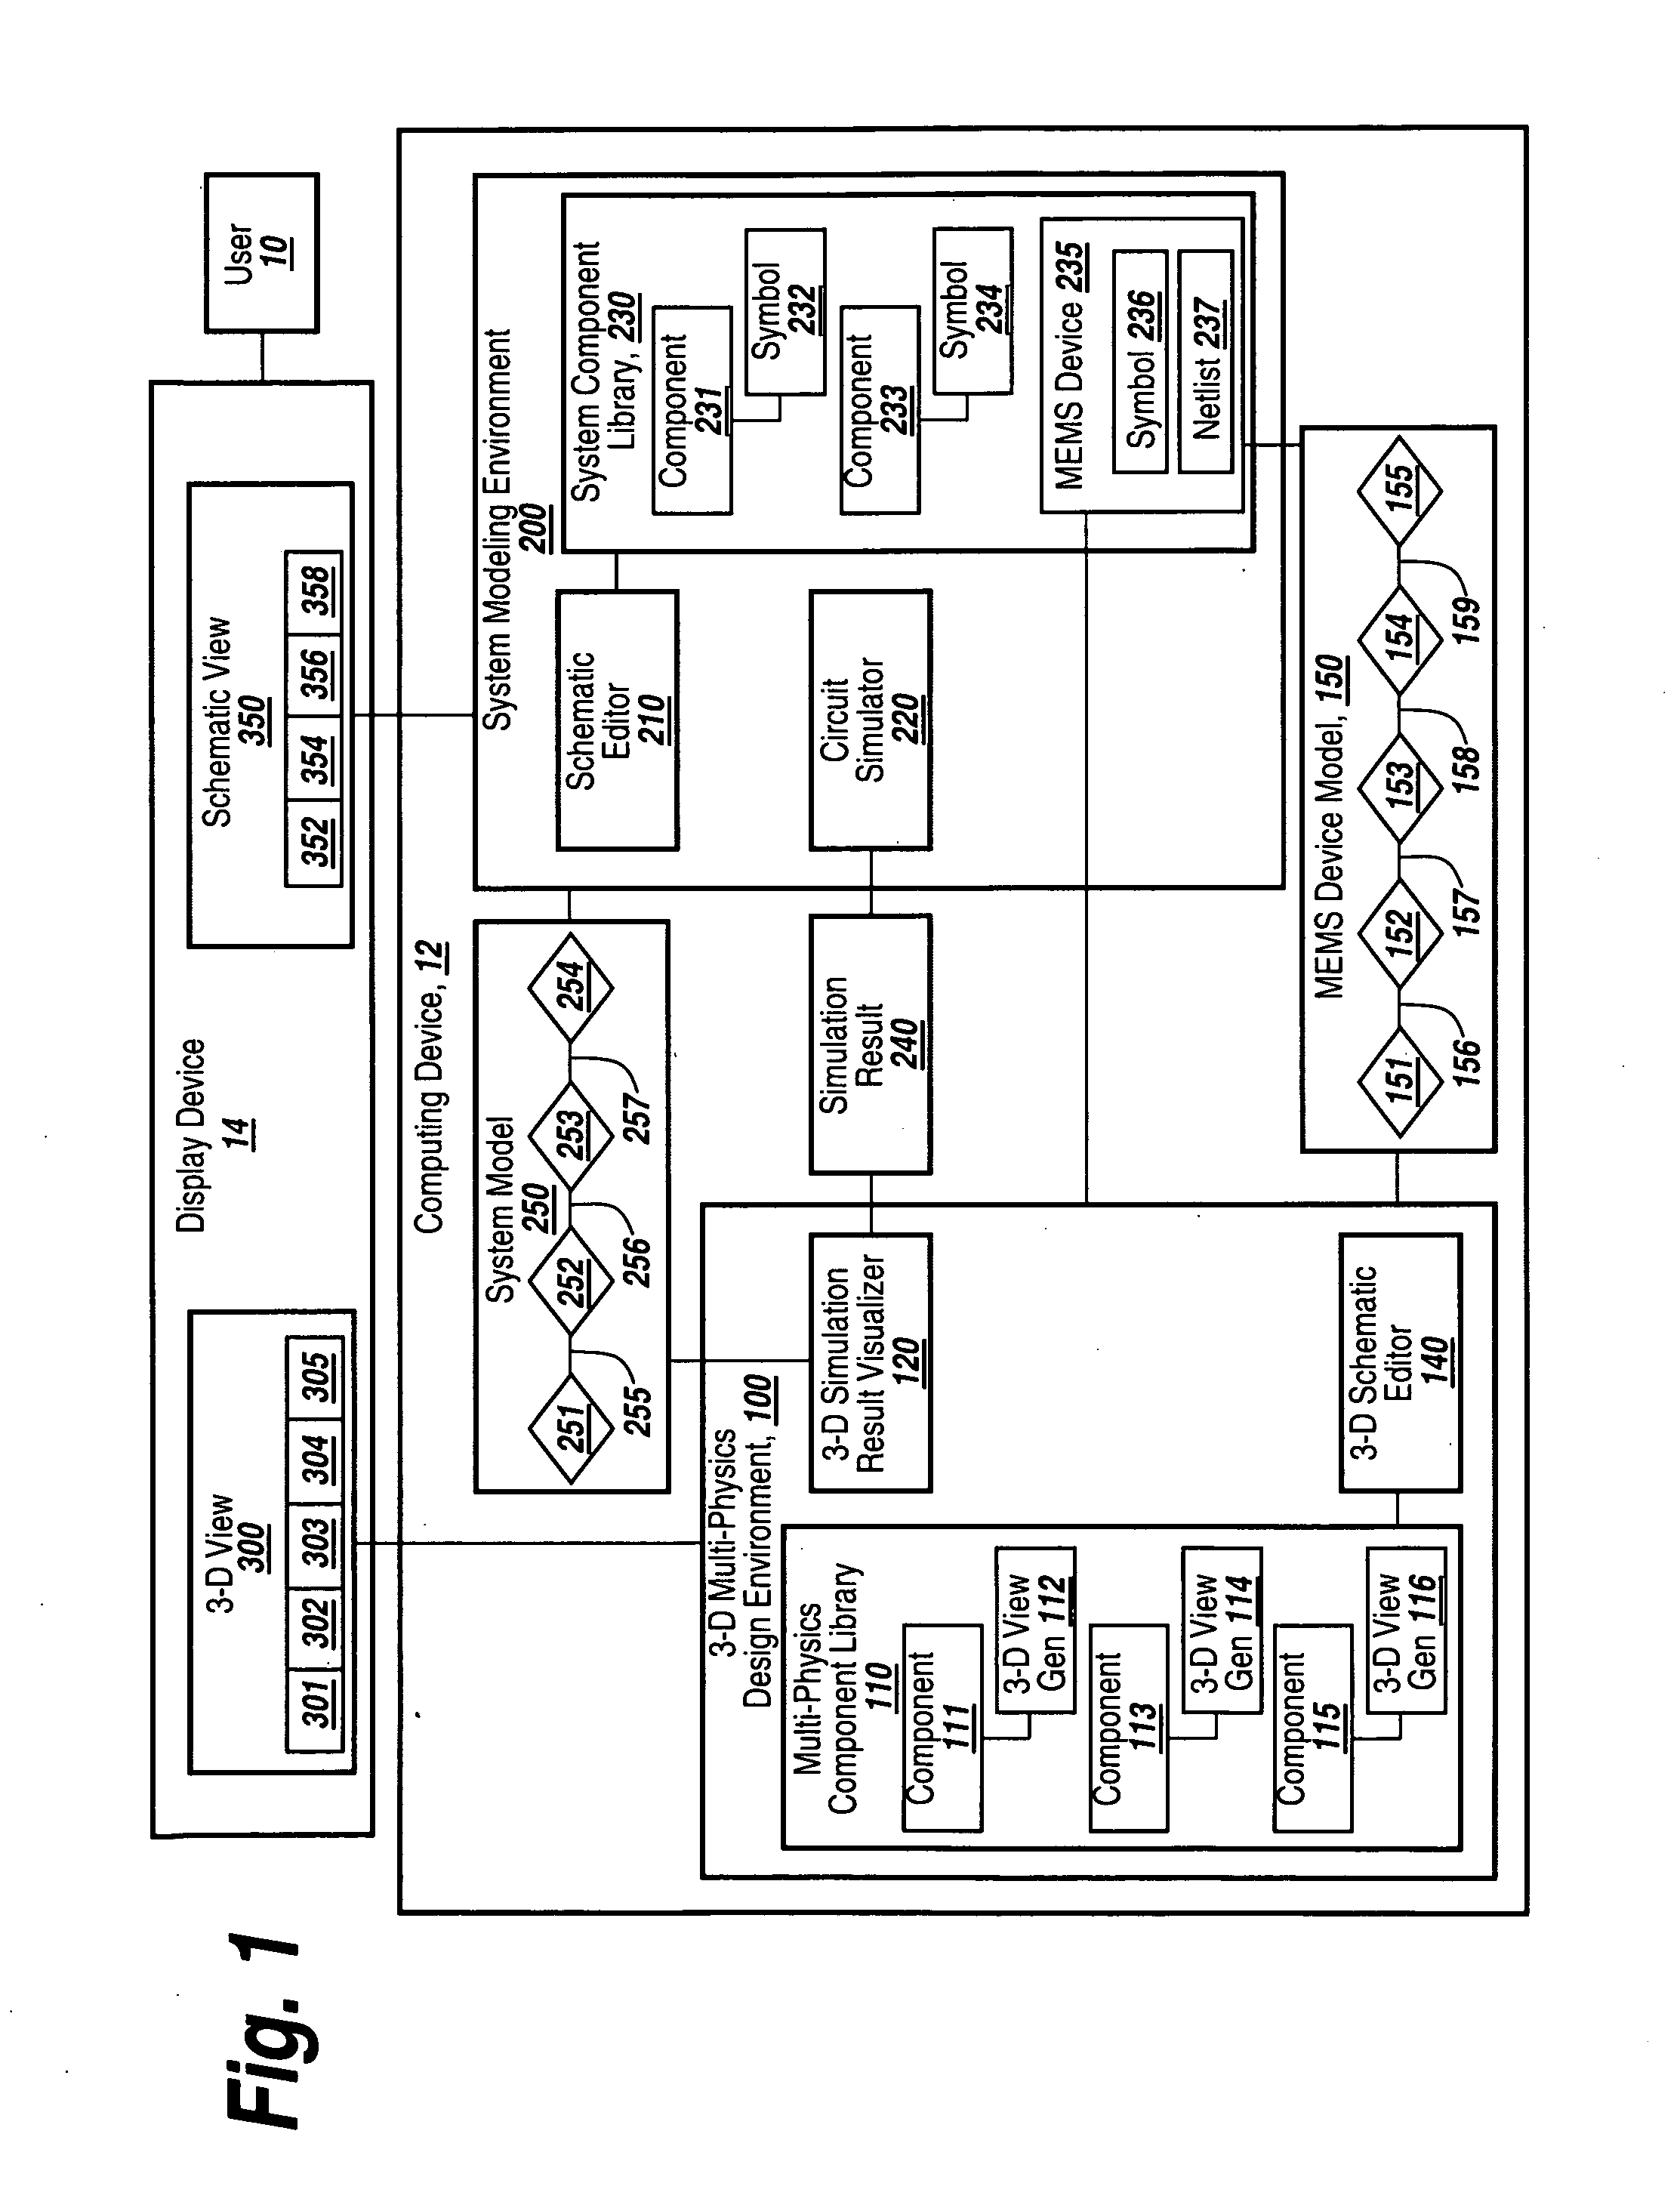 System and method for three-dimensional schematic capture and result visualization of multi-physics system models